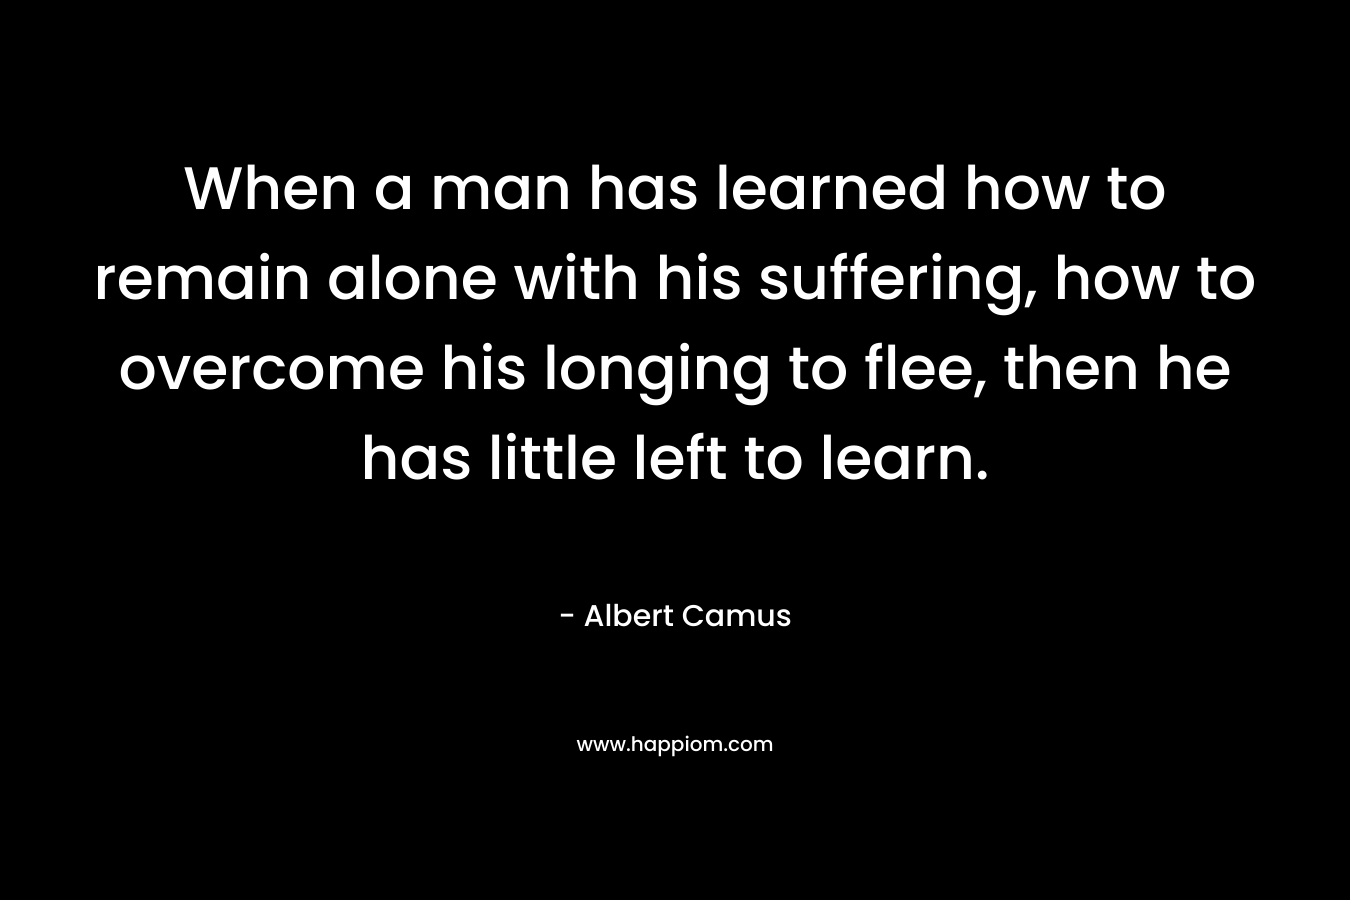 When a man has learned how to remain alone with his suffering, how to overcome his longing to flee, then he has little left to learn.